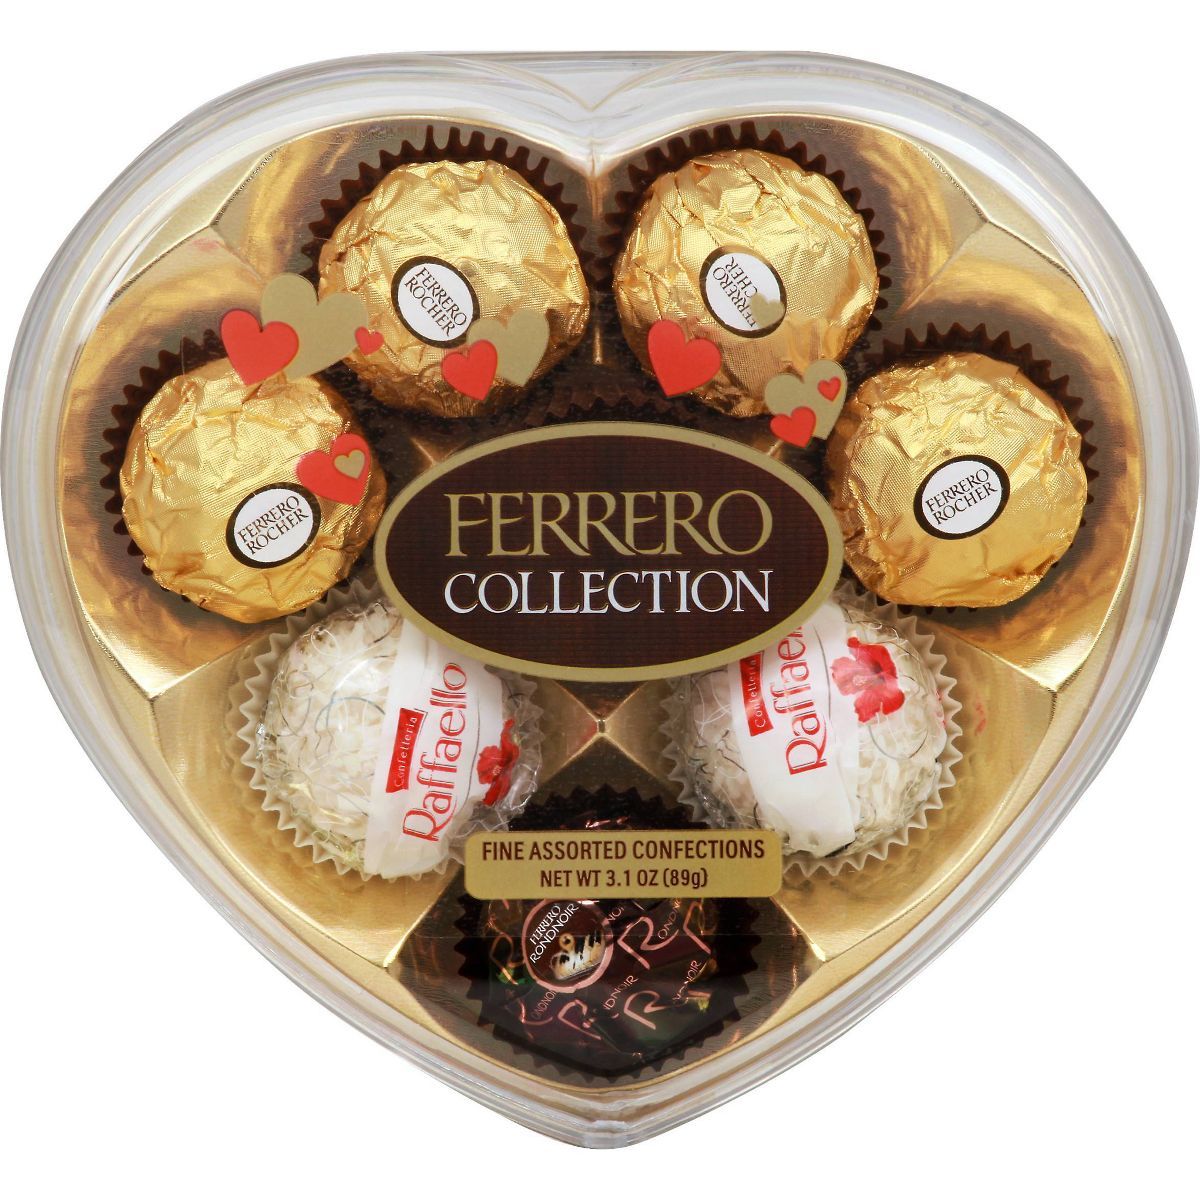 Ferrero Collection Valentine's Fine Assorted Confections - 3.1oz | Target